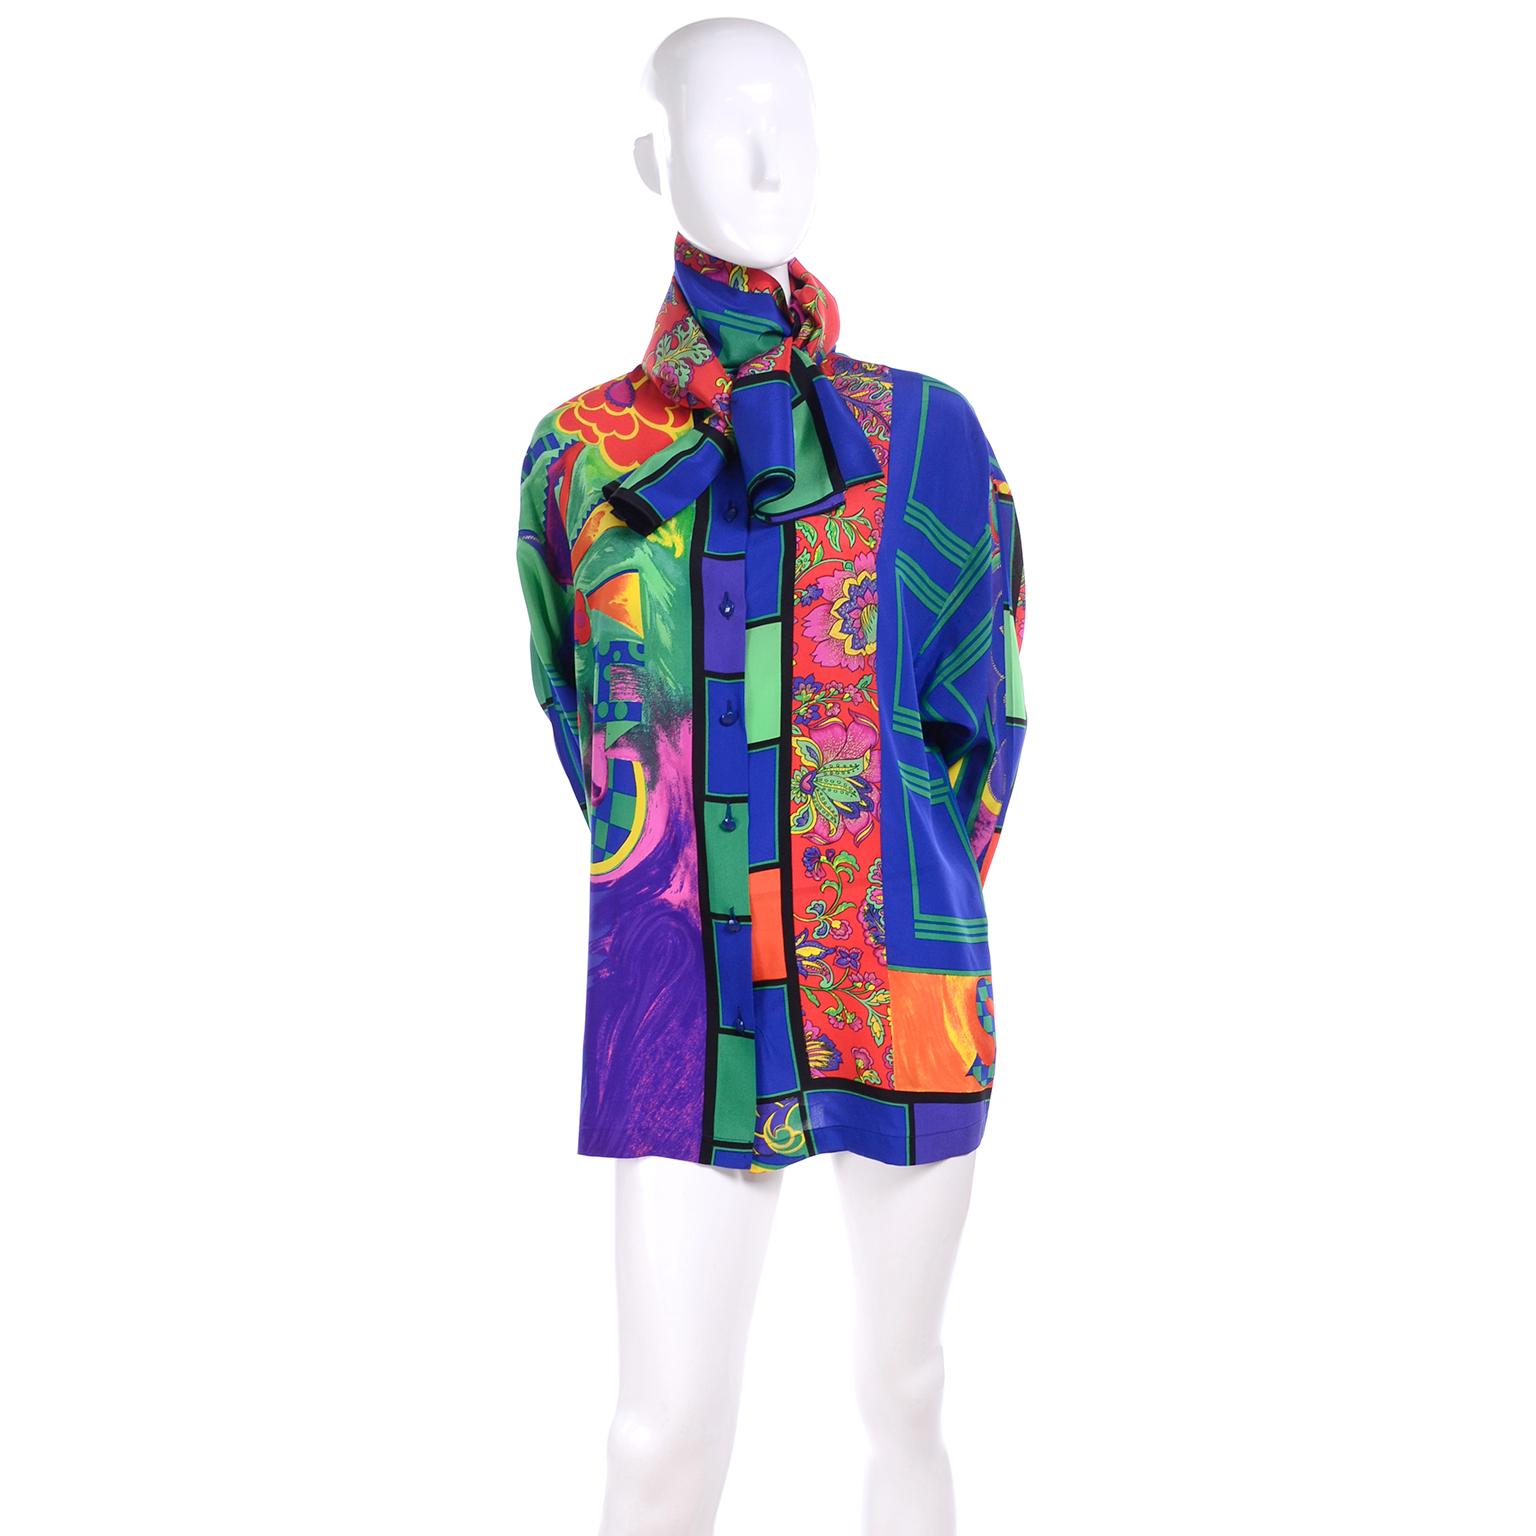 Gianni Versace Early 1990s Bright Colorful Vintage Silk Print Shirt & Huge Scarf For Sale 1